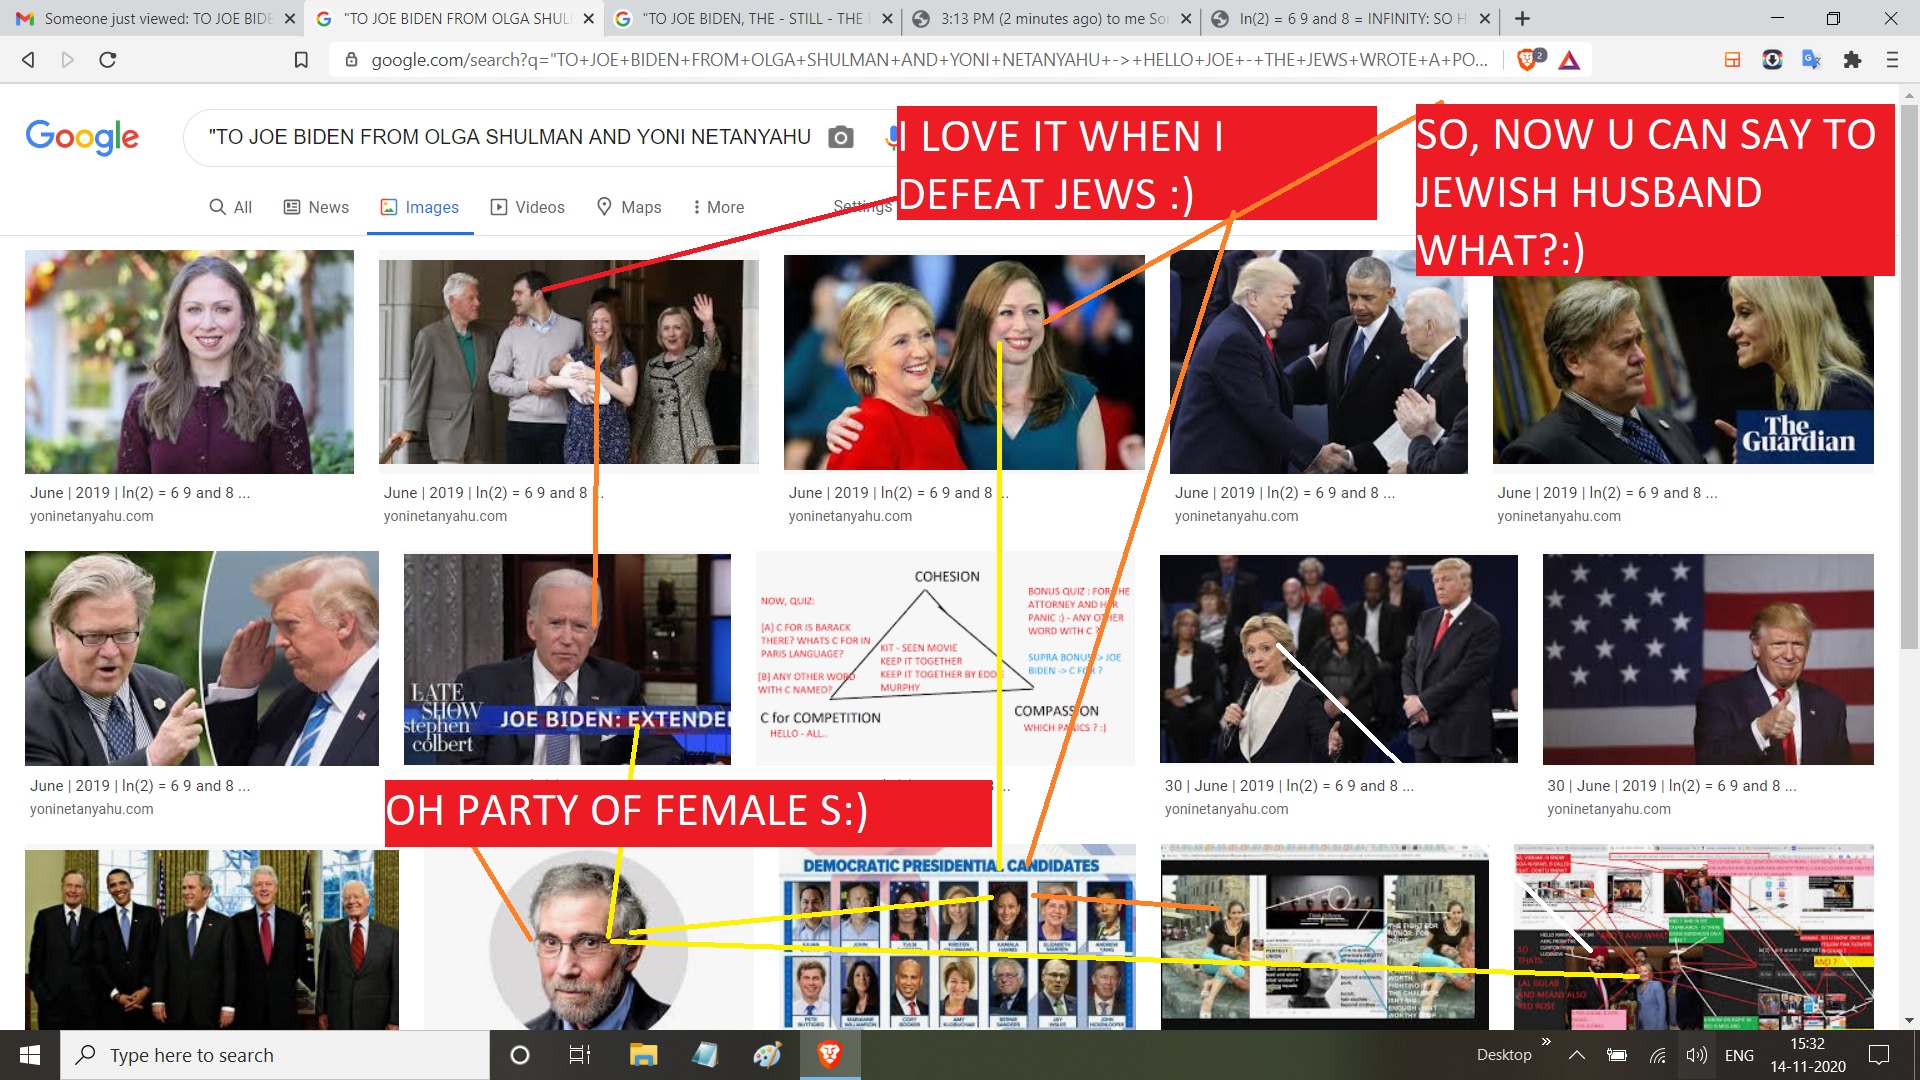 "TO JOE BIDEN FROM OLGA SHULMAN AND YONI NETANYAHU -> HELLO JOE - THE JEWS WROTE A POST HOW BIBLE VIEWS WOMEN AS - MEANING, U CAN CHECK THAT NEW YORK CLICKED IN LESS THAN 3 MINUTES I POSTED - OK - MISTER BIDEN - JEWS ACCEPTED THAT BIBLE AND DEUTERONOMY - CANNOT GIVE WOMEN EQAUL RIGHTS - LIKE ALL MEN ARE CREATED EQAUL, COK CAN THERE BE A FEMALE GOD IN KORAN OR BIBLE OR JEWISH HEBREW BIBE, JEWS - DID ADMIT, CAN U AT DNC ADMIT THAT ? NO DONT SAY POOLITICALLY THIS - IN EELCTIONS - SEASON - BUT CAN U HANDLE THE OBJECTIVE TRUTH ? MISTER BIDEN - JEWS CAN - THIS IS WHEN THE ARE VERY VEERY VERRY DEFENSIVE OF THEIR BOOKS - COK, LETS HAVE ILHAN OMAR ACCEPT THAT ? AND KAMALA - AND TULIS AND SEEMA AND CHELSEA - ALL OF U ARE MARRIED ? - OK OTHER THAN KAMALA, WHO CAN SHOW A FEMALE DGOD COULD BE ACCEPTABLE IN THEIR CREDENZA - BY THE DINENR TABLE WHEN U PUT FOO DON A TABLE - THERE MANY TIMES IS A FEMALE GODDESS OK EMILY LIST - AM AI WRONG OR LYING OR MAKING TIS UP OR EXAGERRATING? OK.. NOW, FROM OLGA TO KAMALA - U KNOW JUST AS FUKKUYAMA APPEADING FRO CLASS AND SAID ECONOMCIS, IS BETTER UNIFIER, THEN HOW ABOUT MOM - AS BEING A BETTER UNIFIER, I MEAN DID U NOT SAY YOUR LENSES WERE BORROWED FROM A HINDU WOMAN WHOS NAME YOUR NAME AS MOM ?"